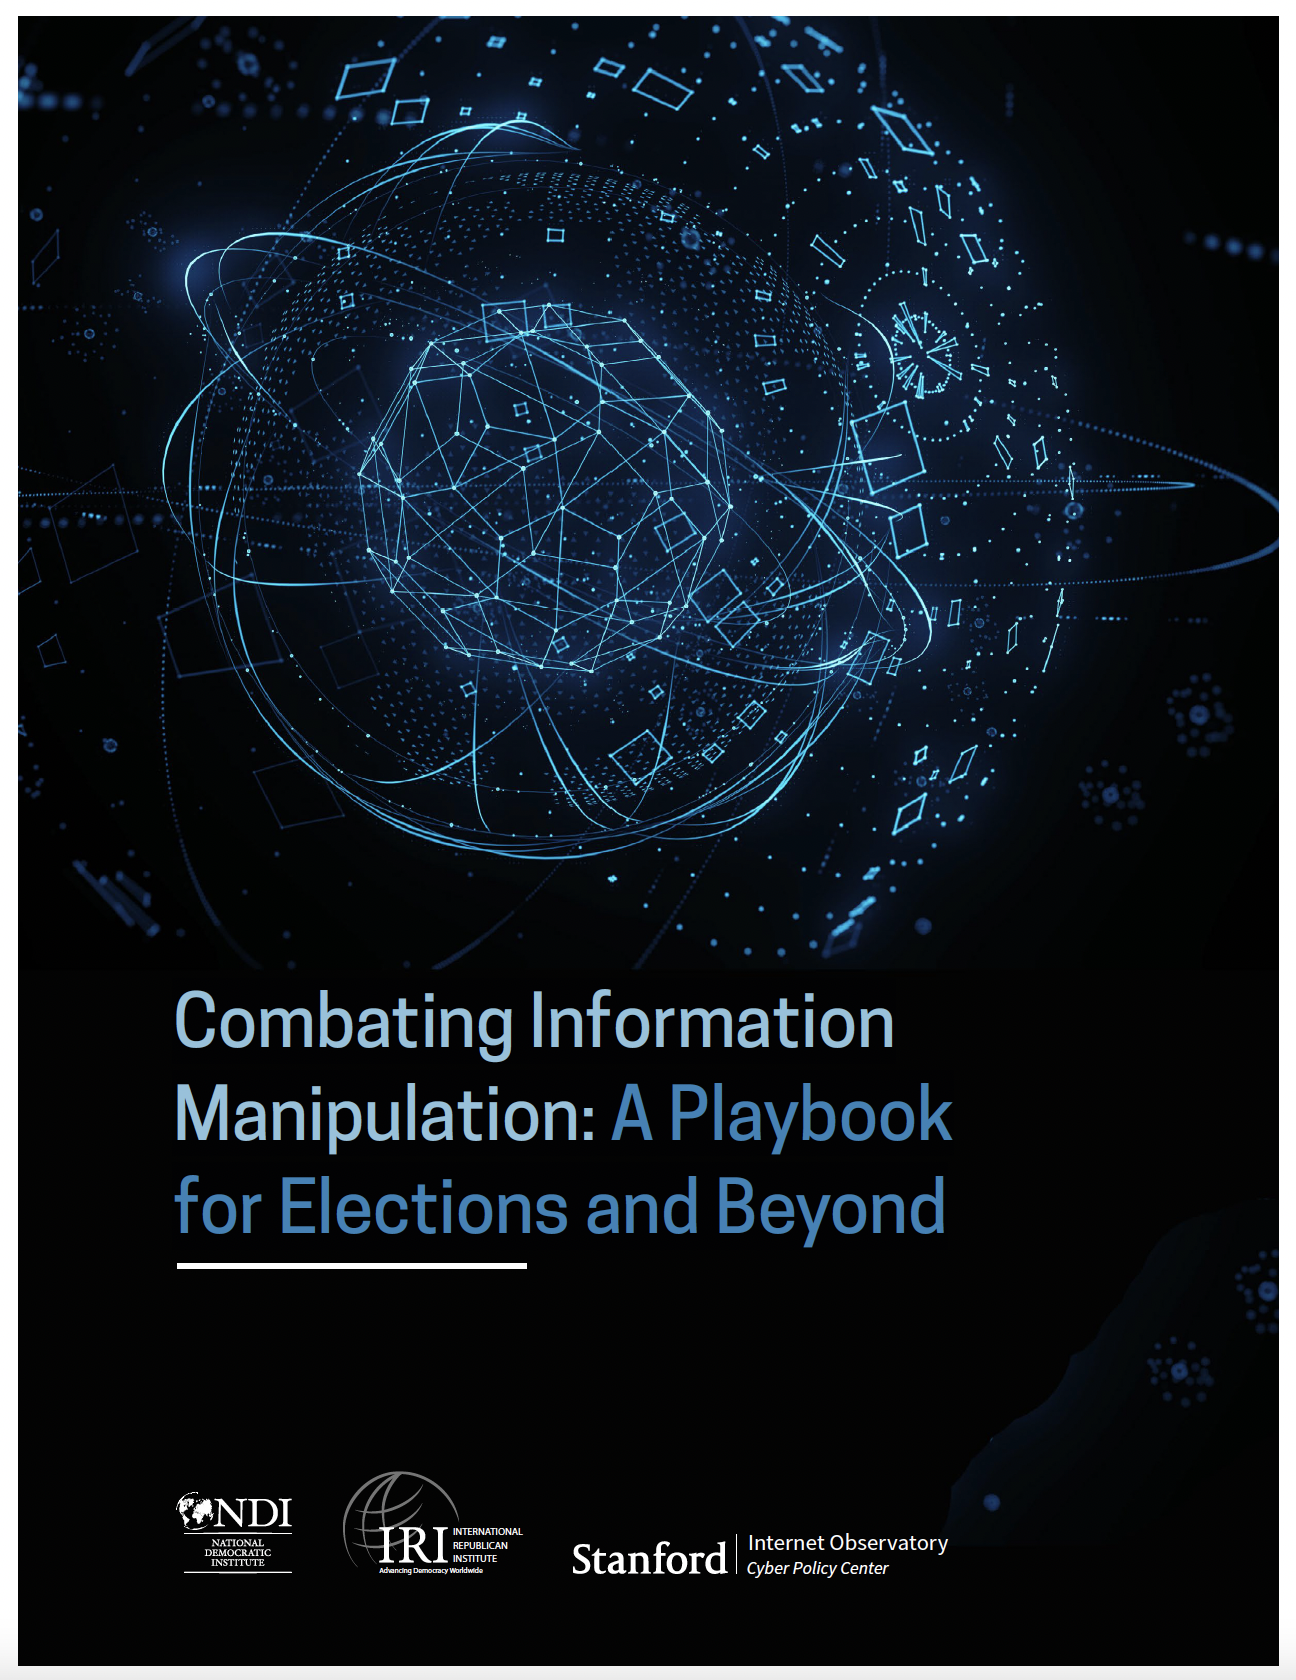 Combating Information Manipulation: A Playbook for Elections and Beyond